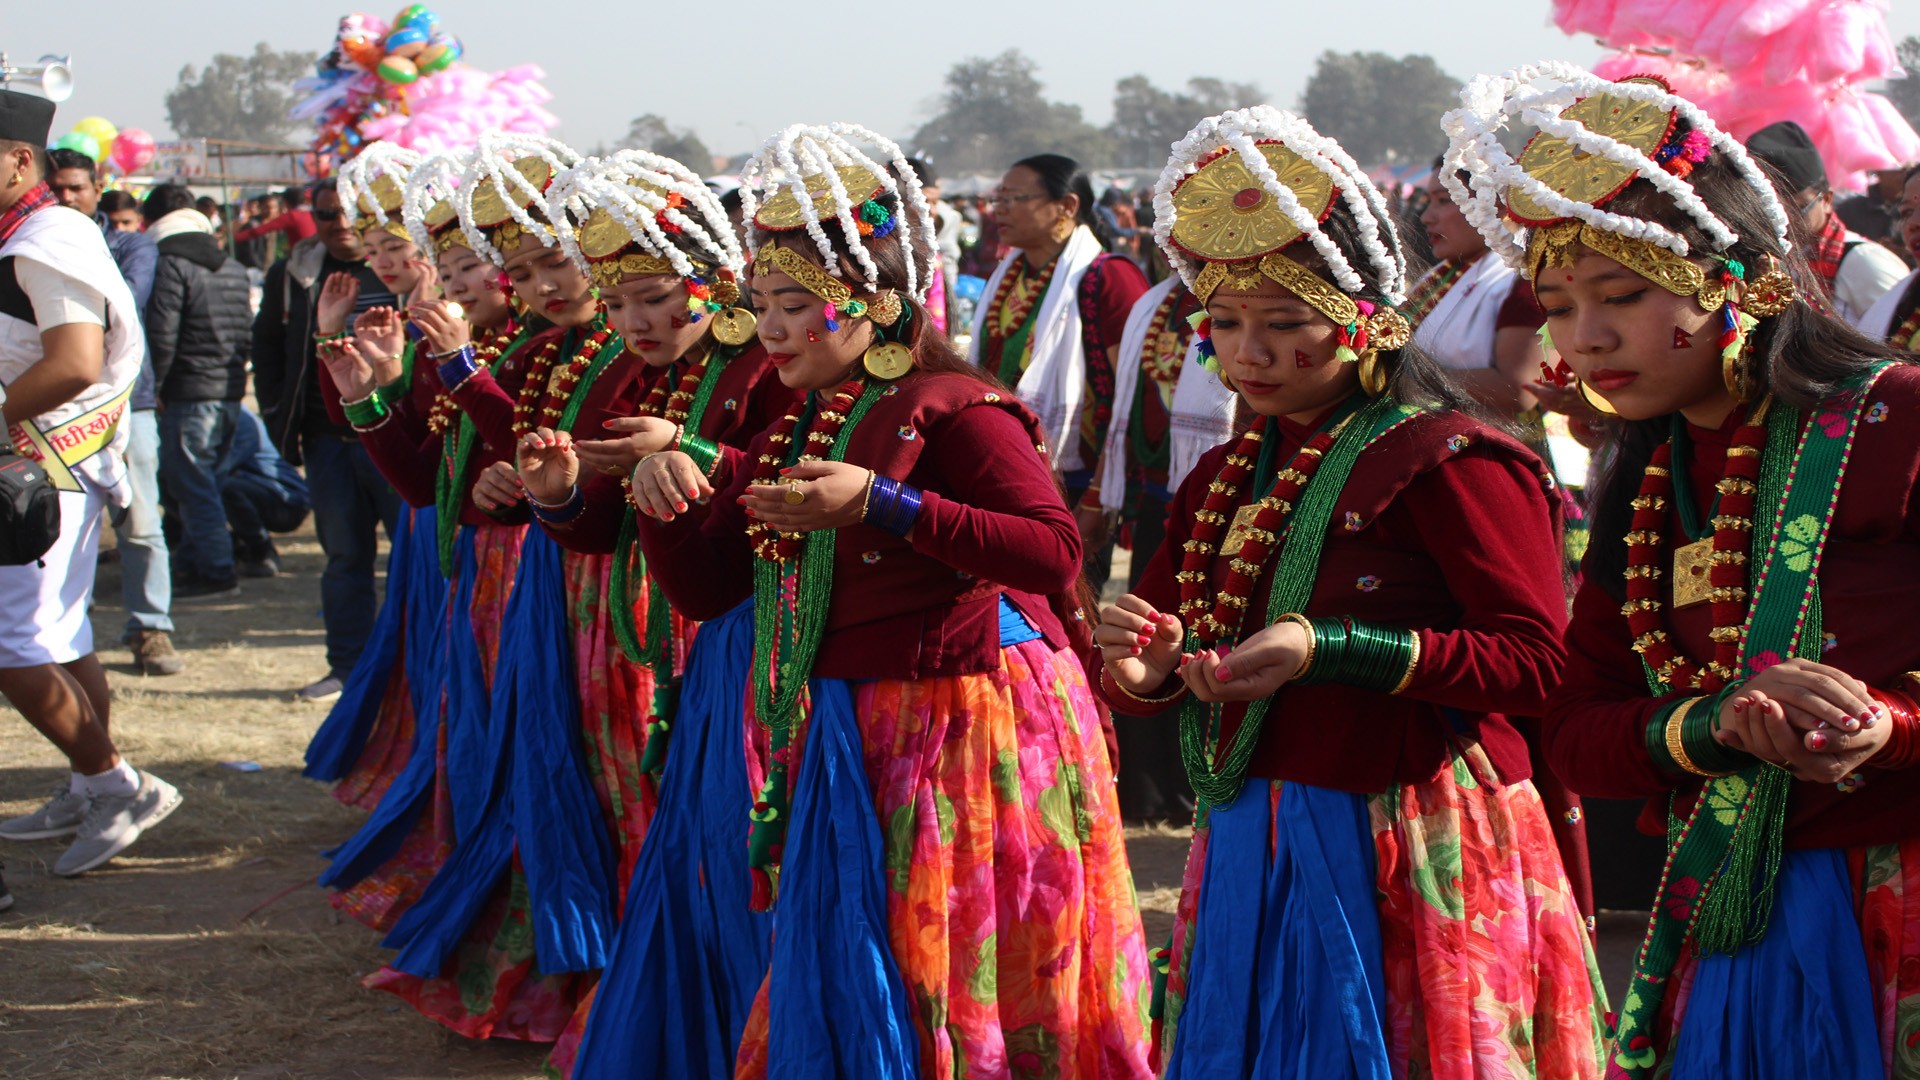 "The festival of high Lander in Nepal"

Nepal is formed by multi religions, multi lingual, multi ethnic group and tradition. ... Lhosar Festival